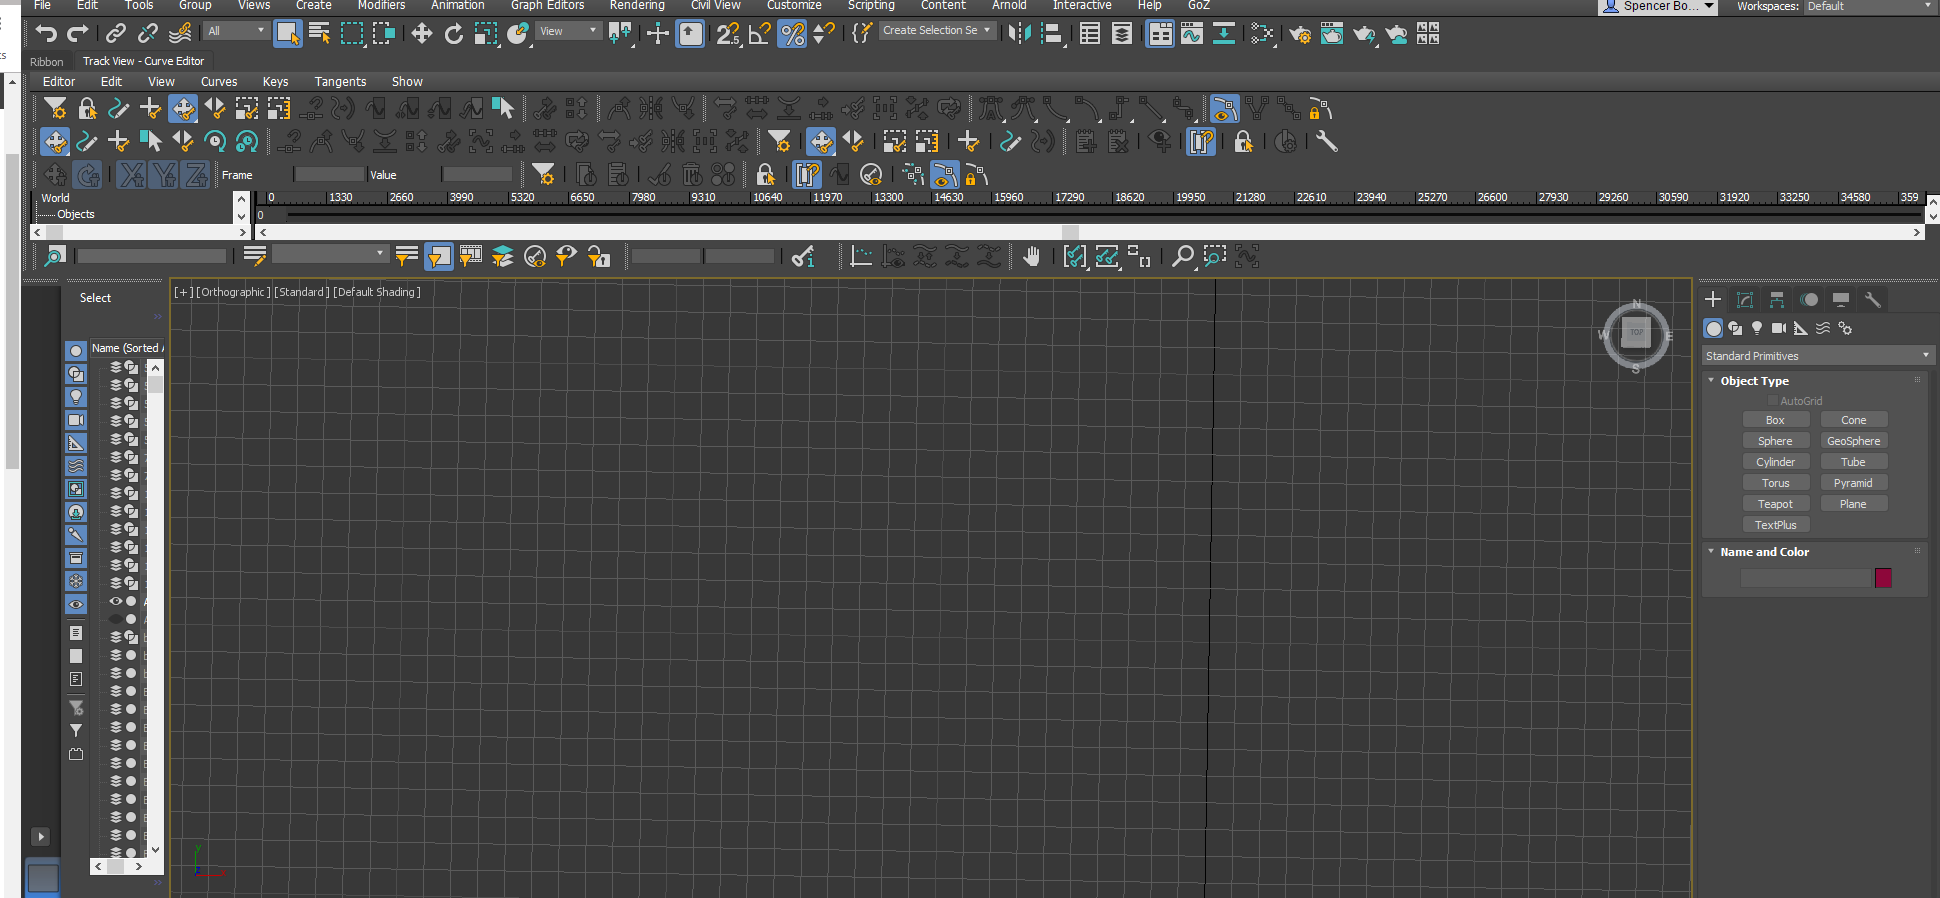 Curve Editor is stuck - Autodesk Community - 3ds Max